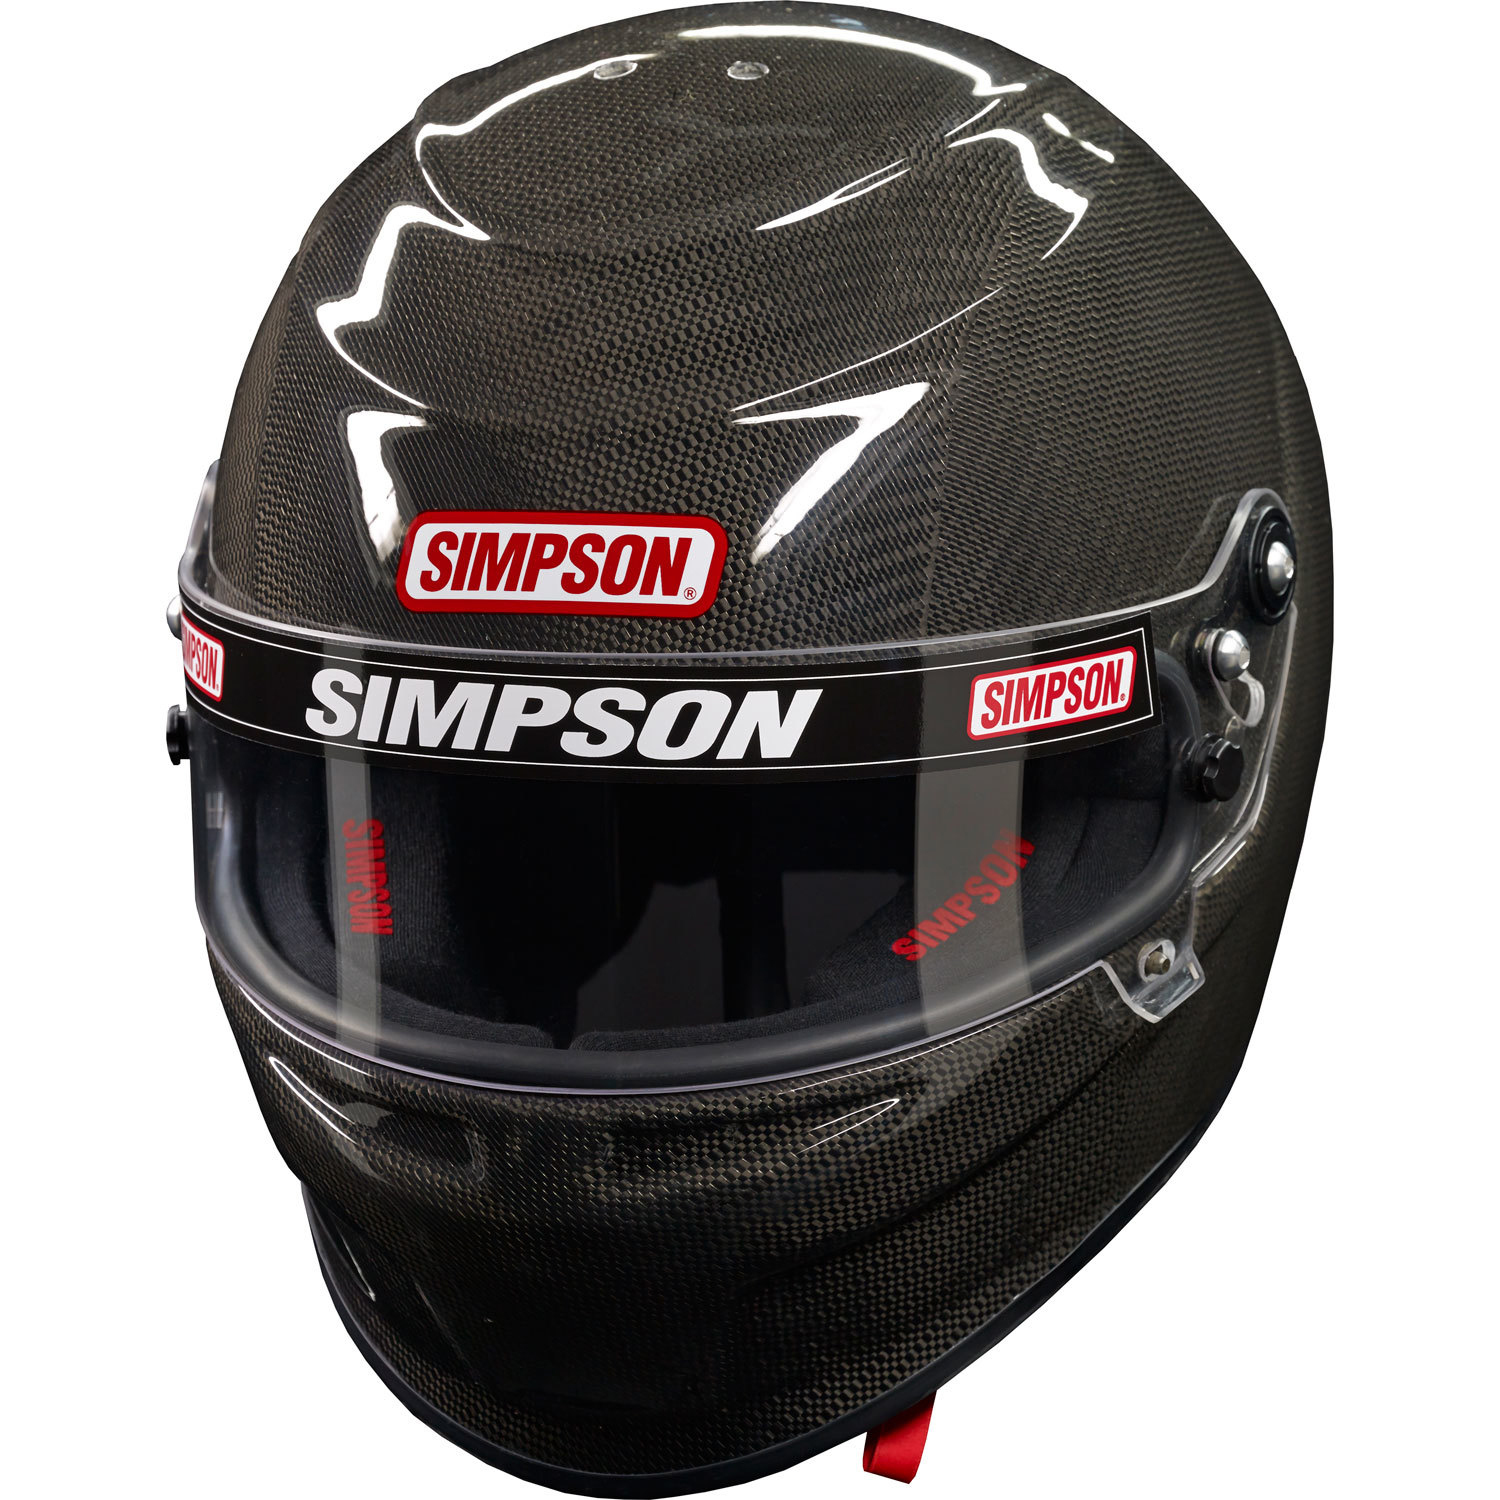 Simpson Safety 785000C Helmet, Venator, Snell SA2020, Head and Neck Support Ready, Carbon Fiber, X-Small, Each